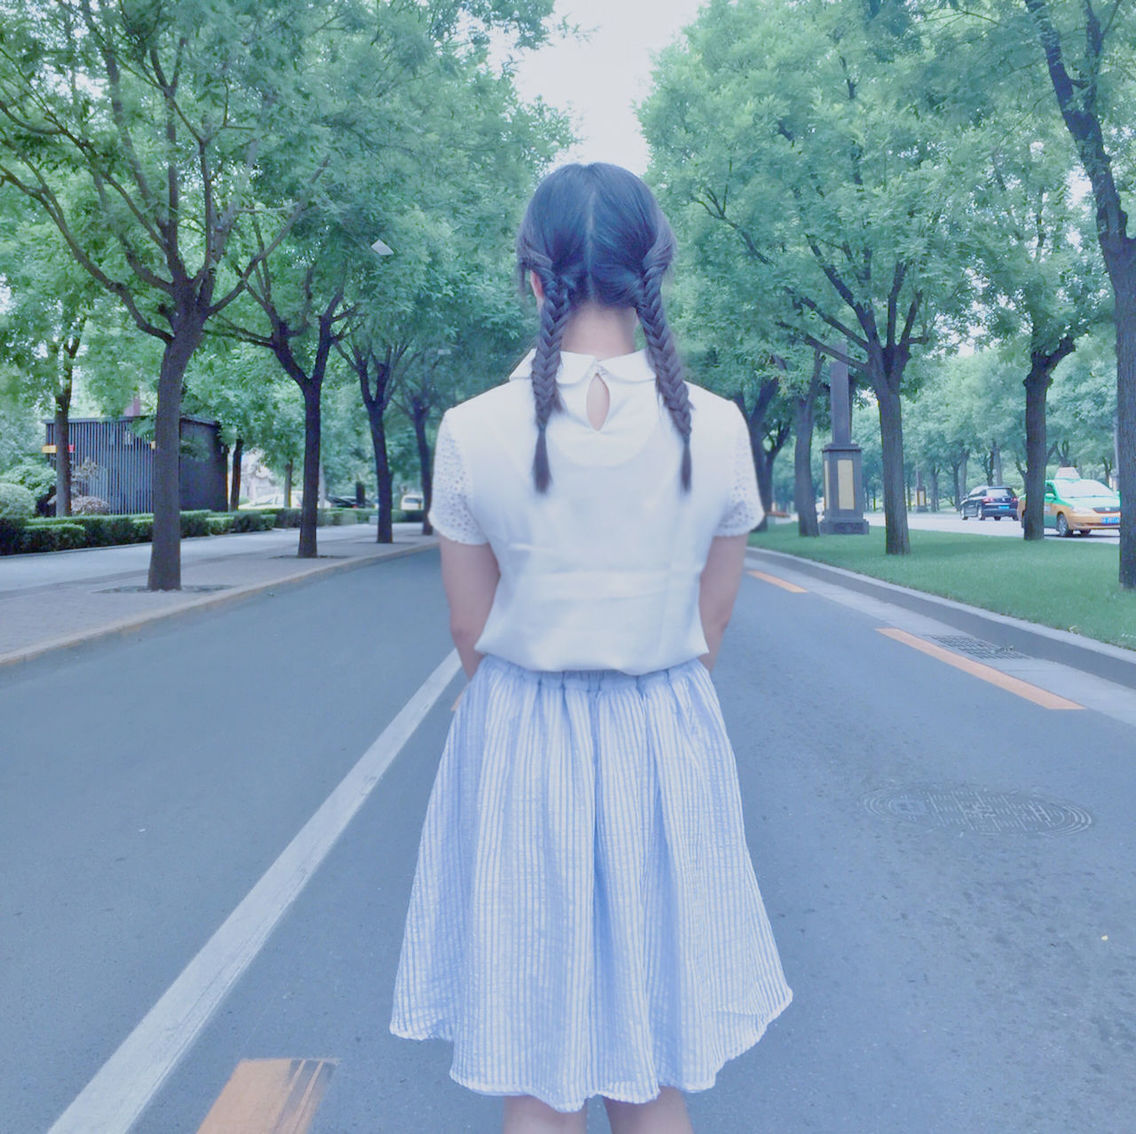 one person, tree, dress, plant, women, road, fashion, skirt, blue, standing, young adult, hairstyle, white, day, transportation, city, full length, clothing, adult, casual clothing, spring, street, nature, front view, female, lifestyles, costume, outdoors, child, long hair, leisure activity, walking, looking